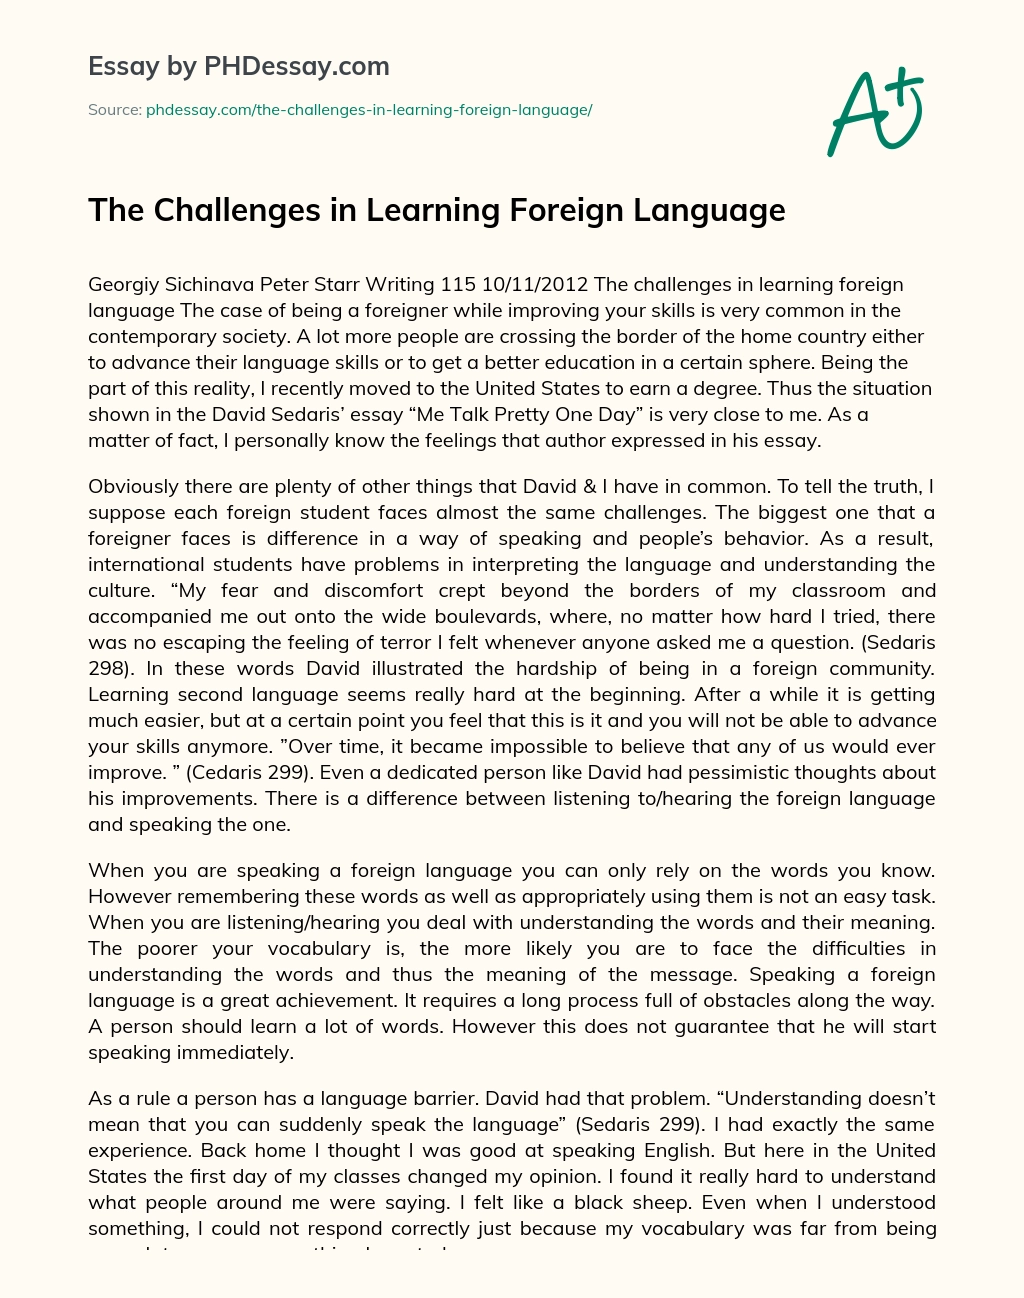 The Challenges in Learning Foreign Language - PHDessay.com